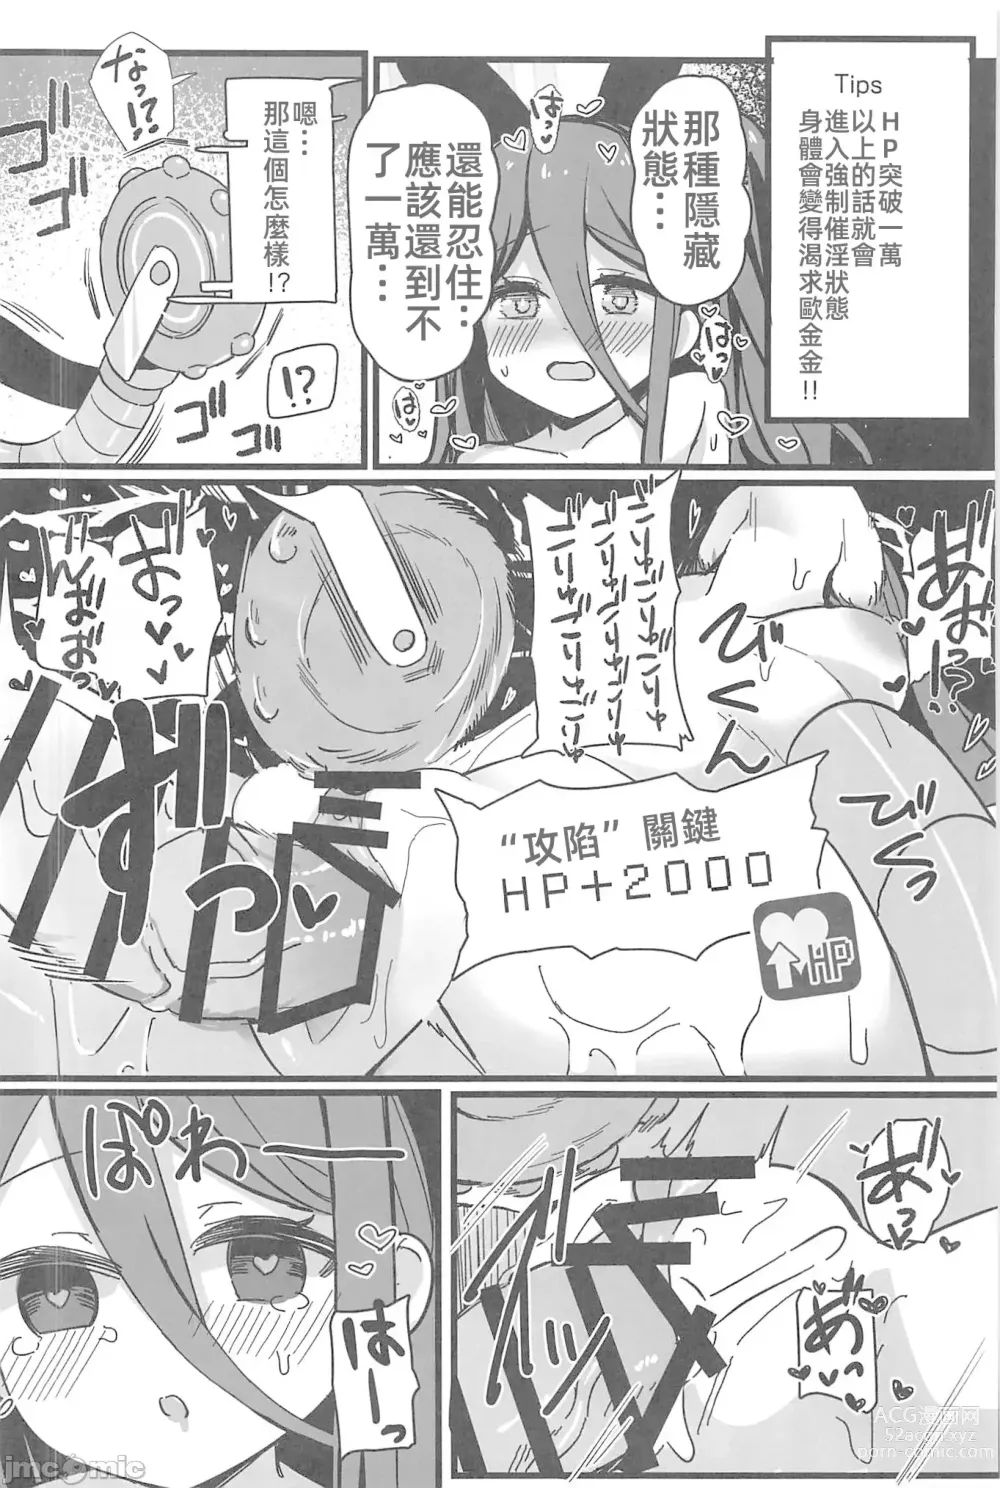 Page 17 of doujinshi 絕對要攻克給你看!!